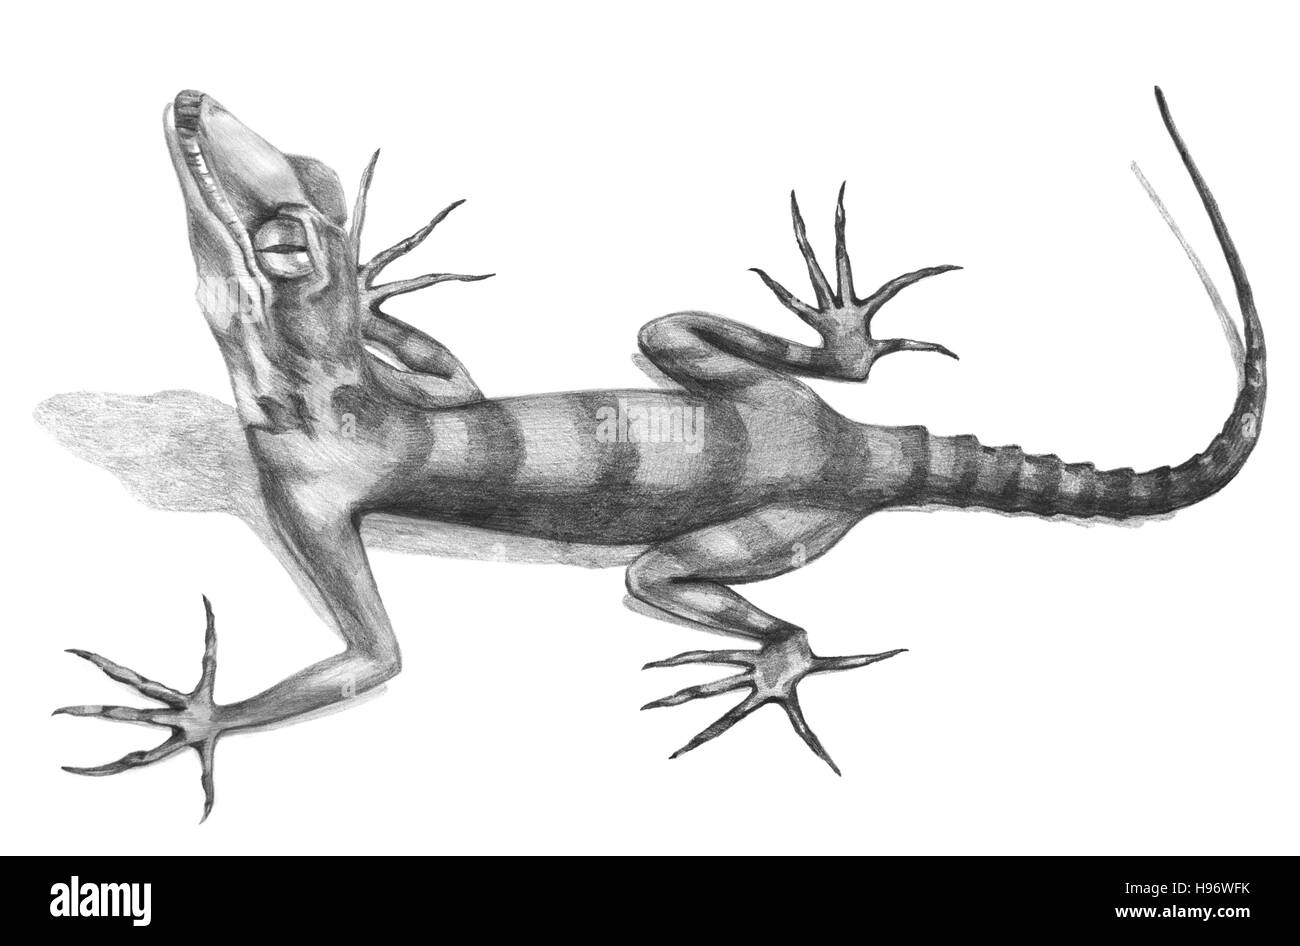 Lizard  hand-drawn illustration in sketch style Stock Photo